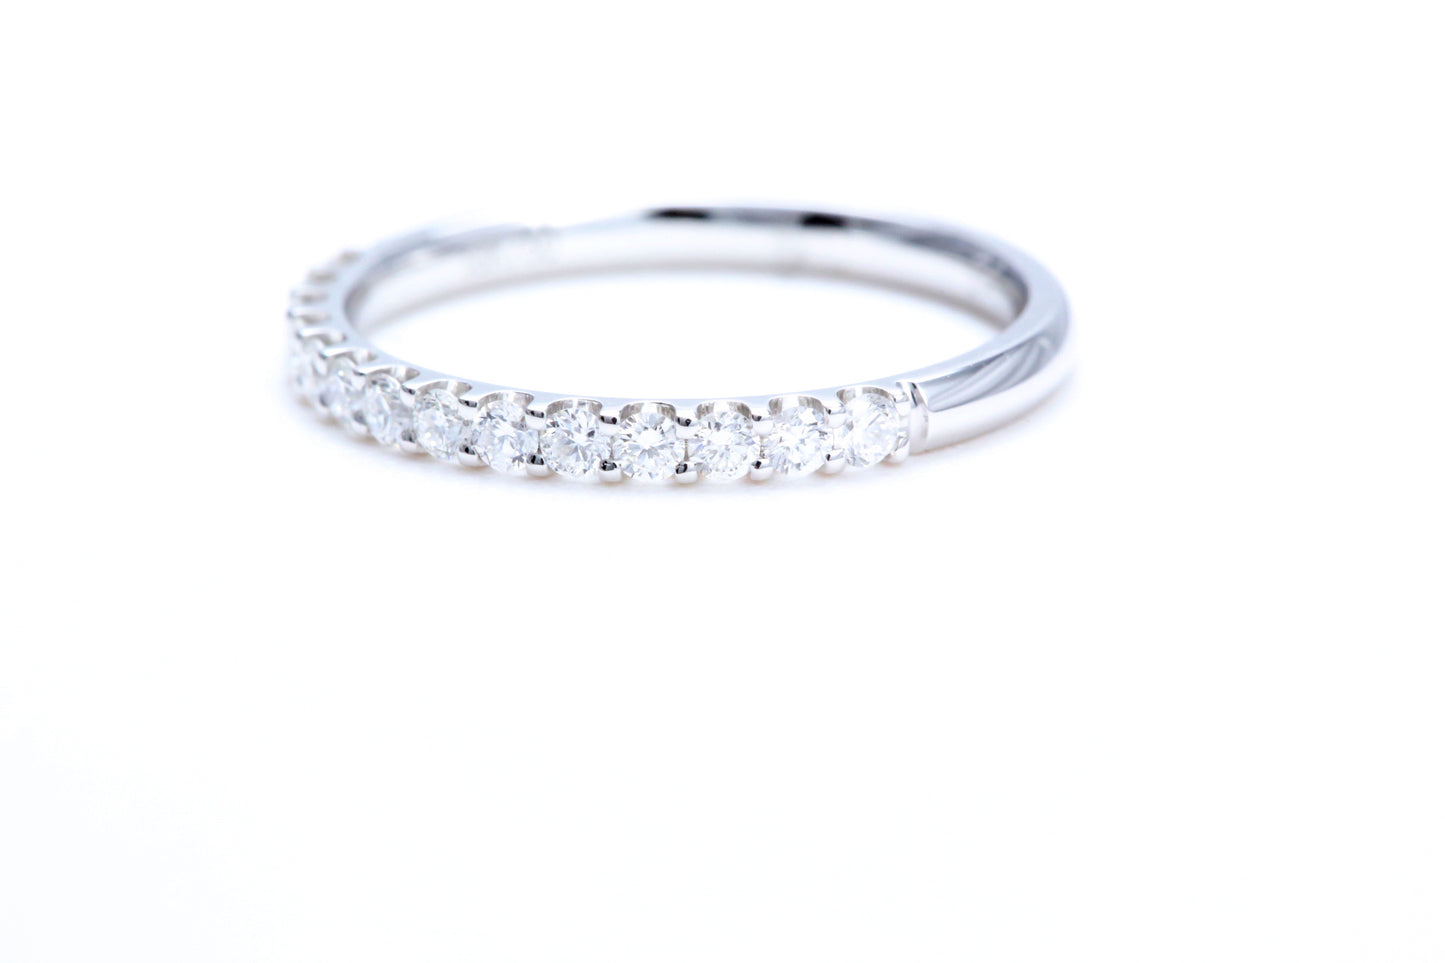 Minimalist Pavé Diamond Ring 1/3 of a carat total weight in 18K white gold